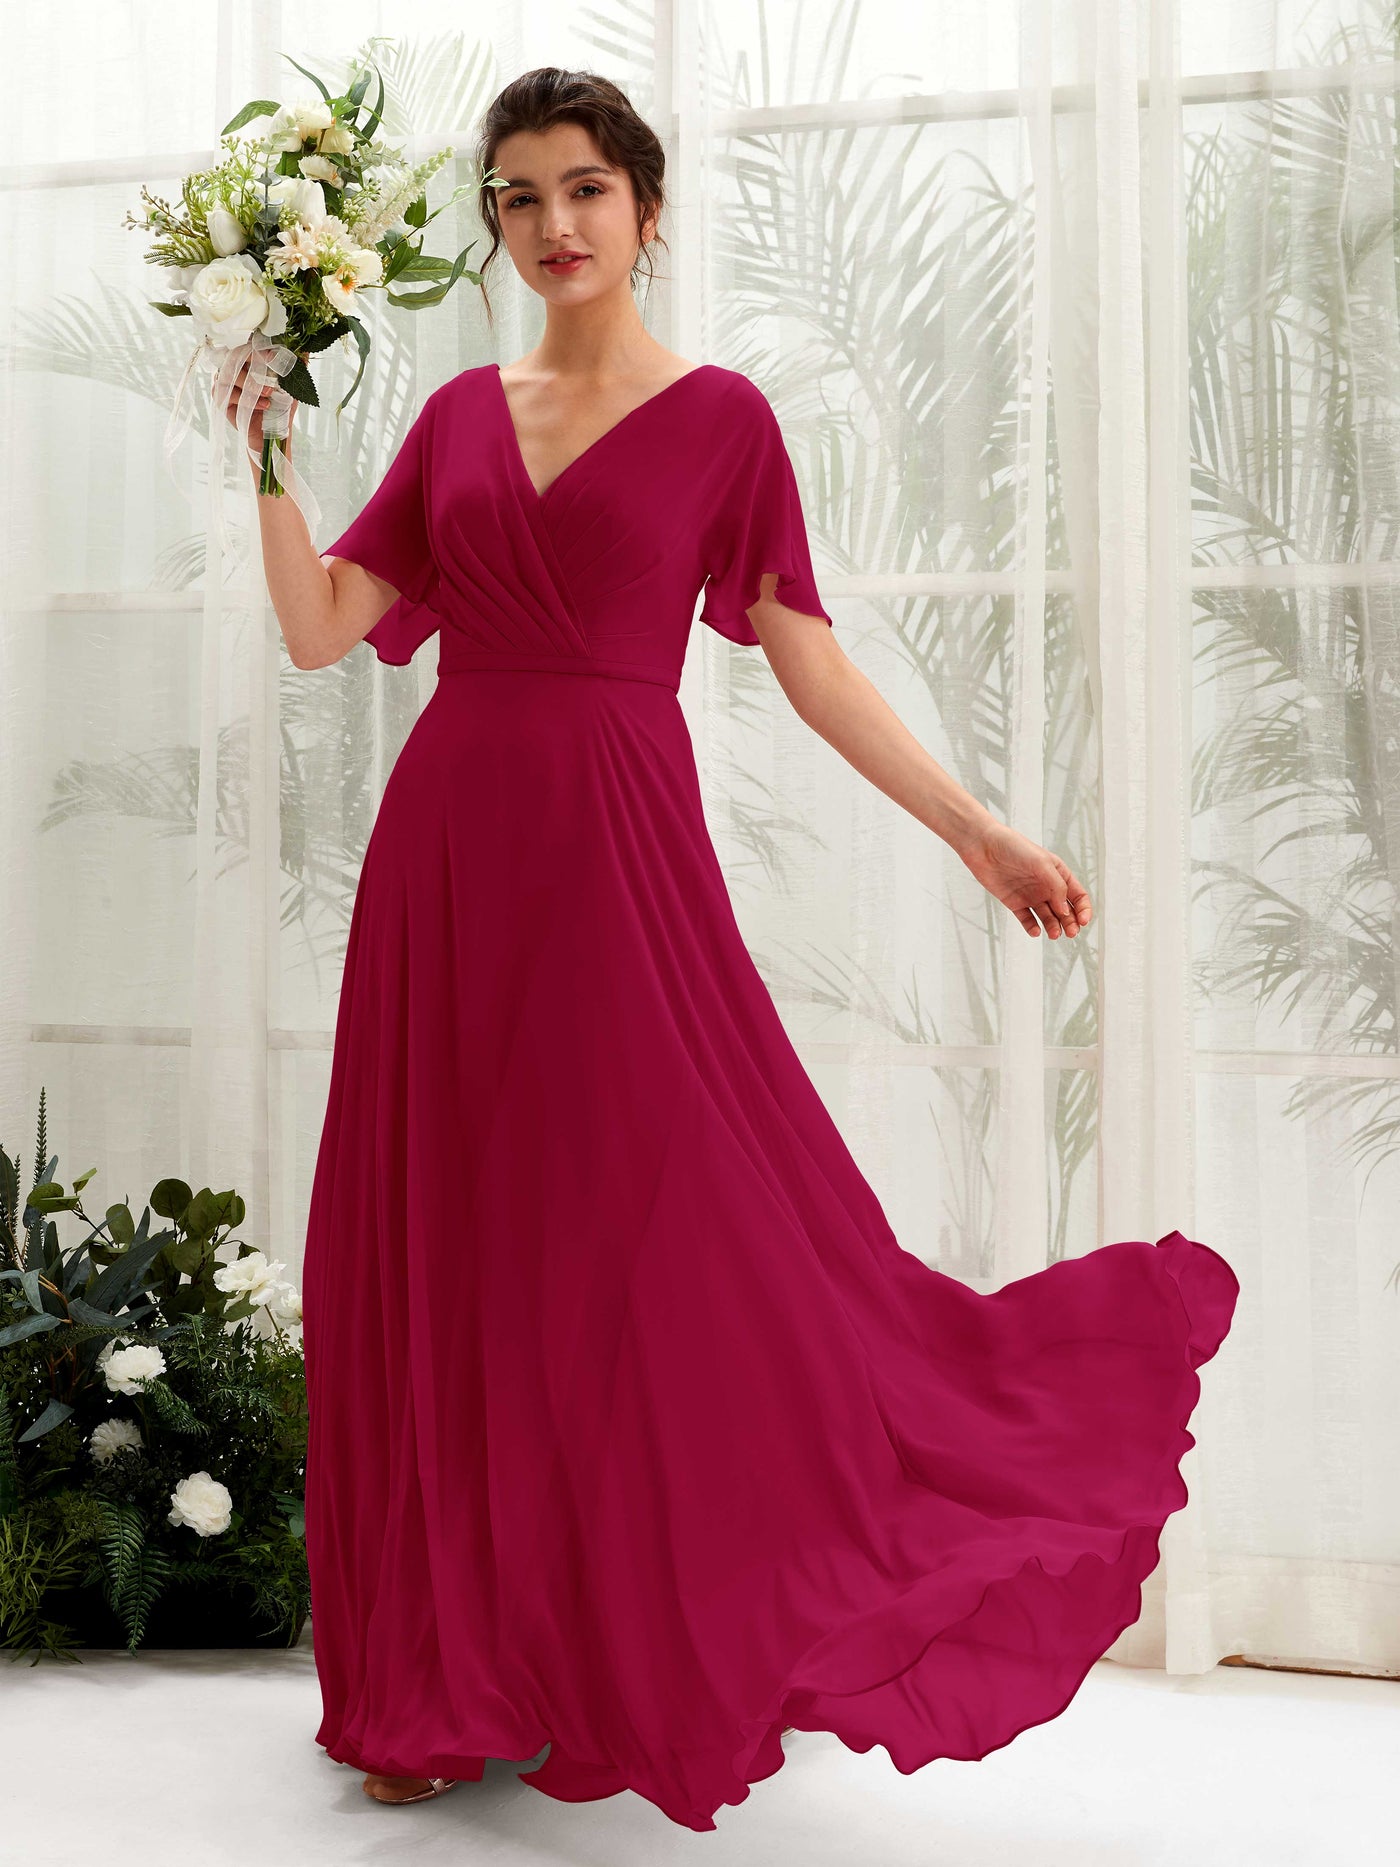 Jester Red Bridesmaid Dresses Bridesmaid Dress A-line Chiffon V-neck Full Length Short Sleeves Wedding Party Dress (81224641)#color_jester-red